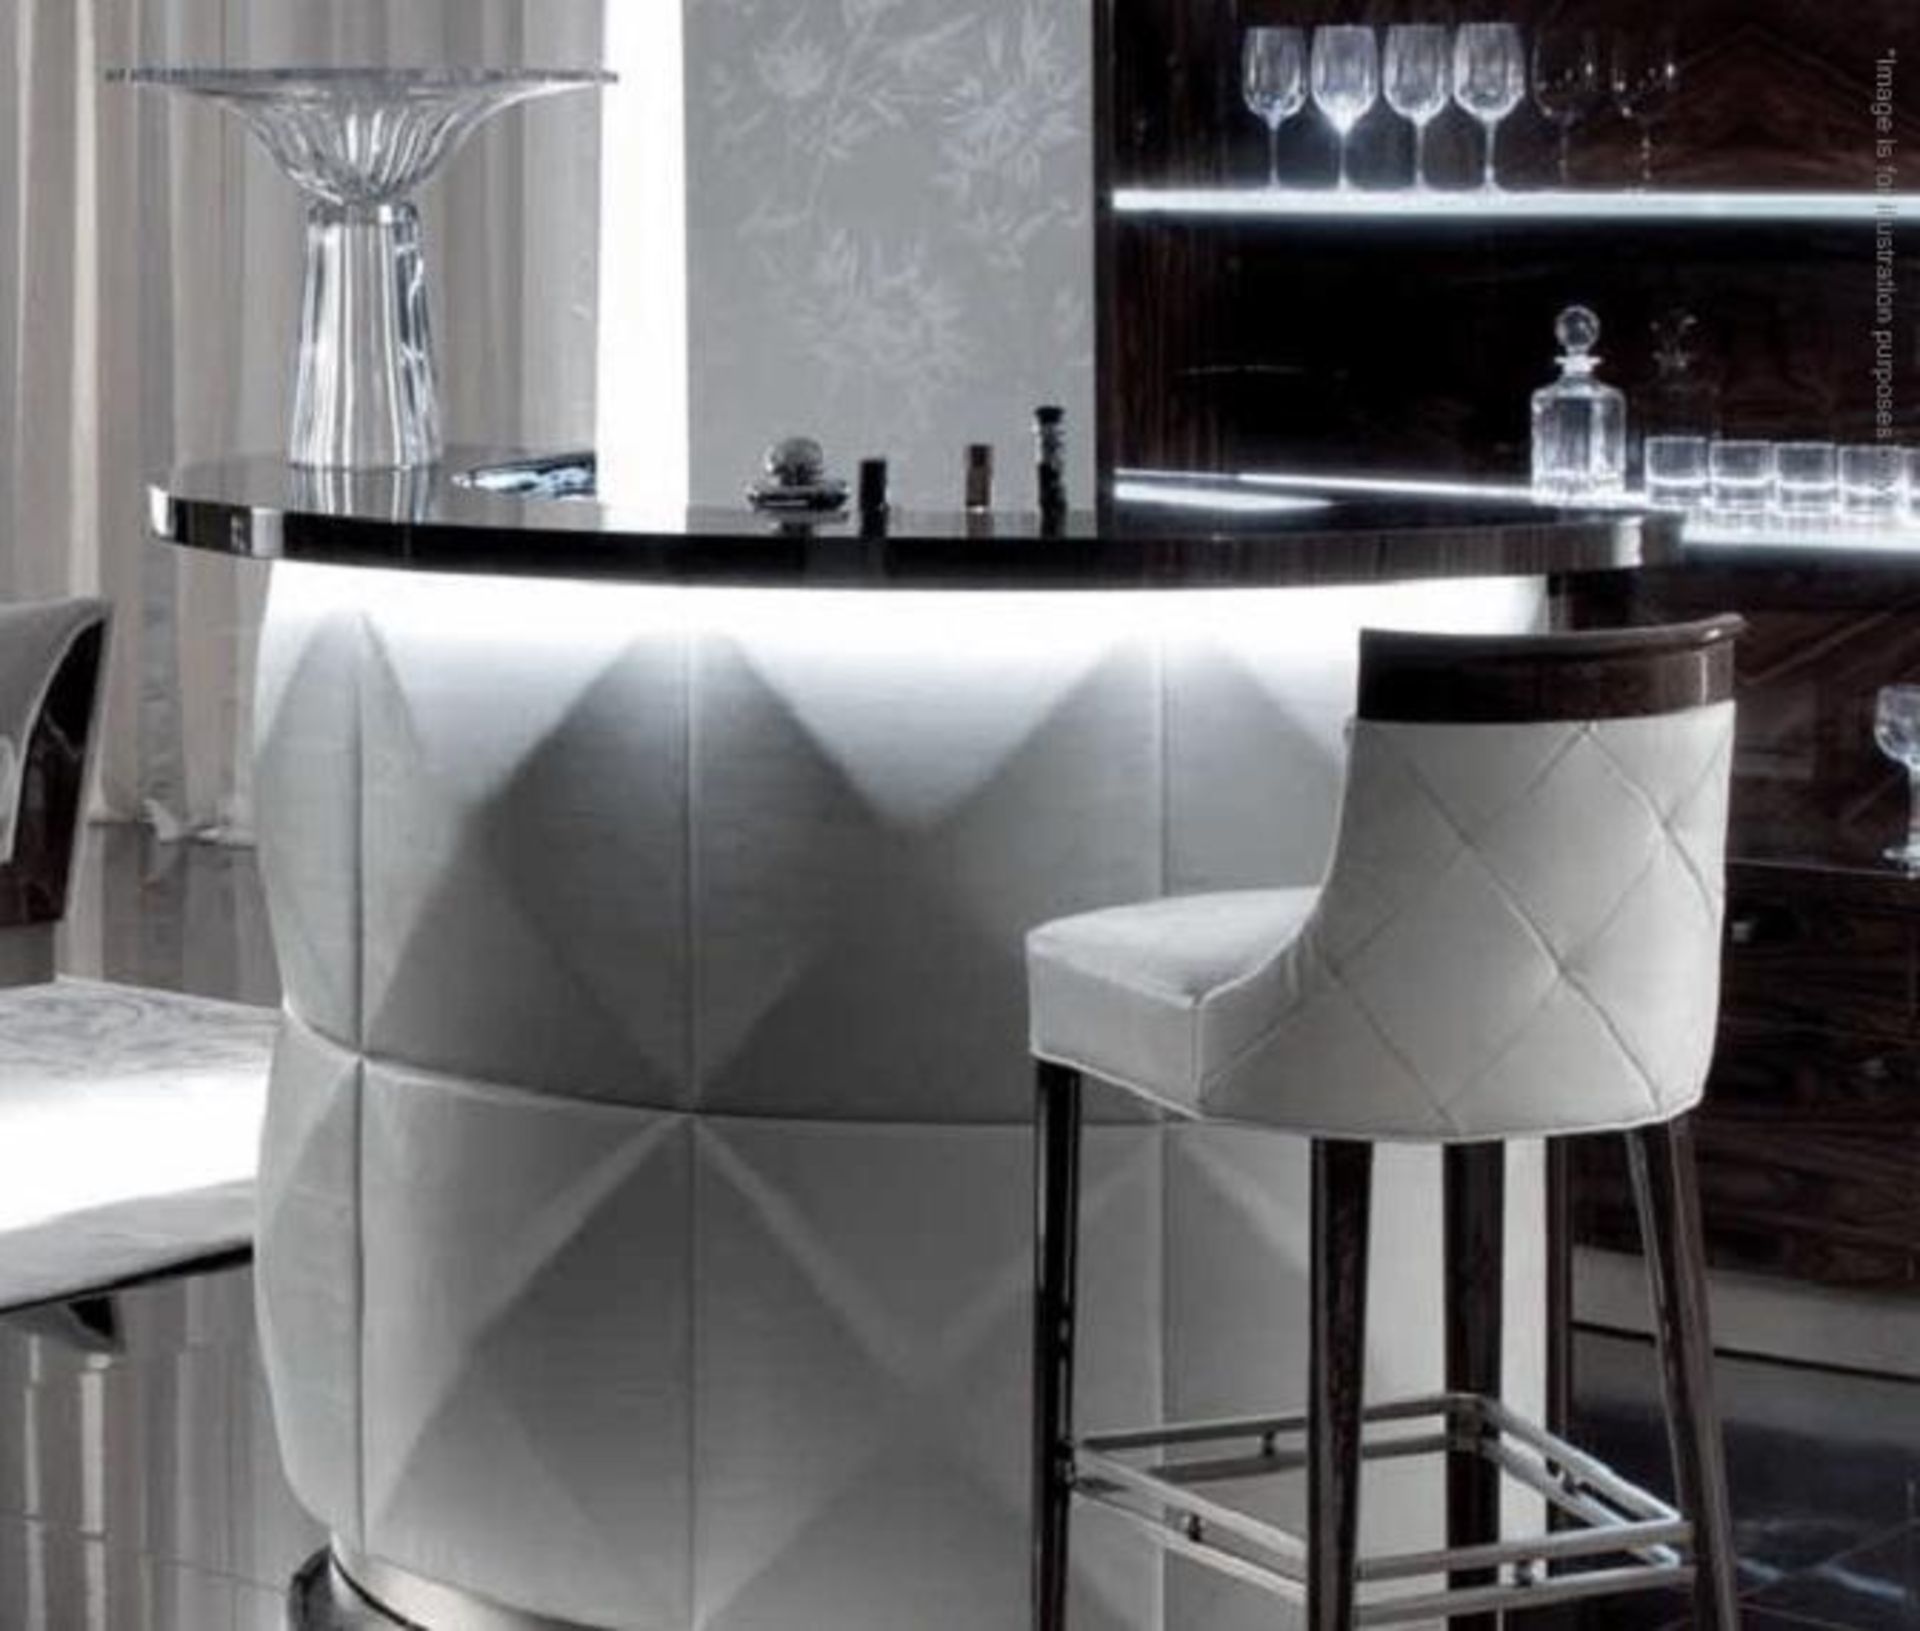 1 x Giorgio Coliseum Curved Living Room Bar With Leather Upholstered Frontage - Original RRP £8,949